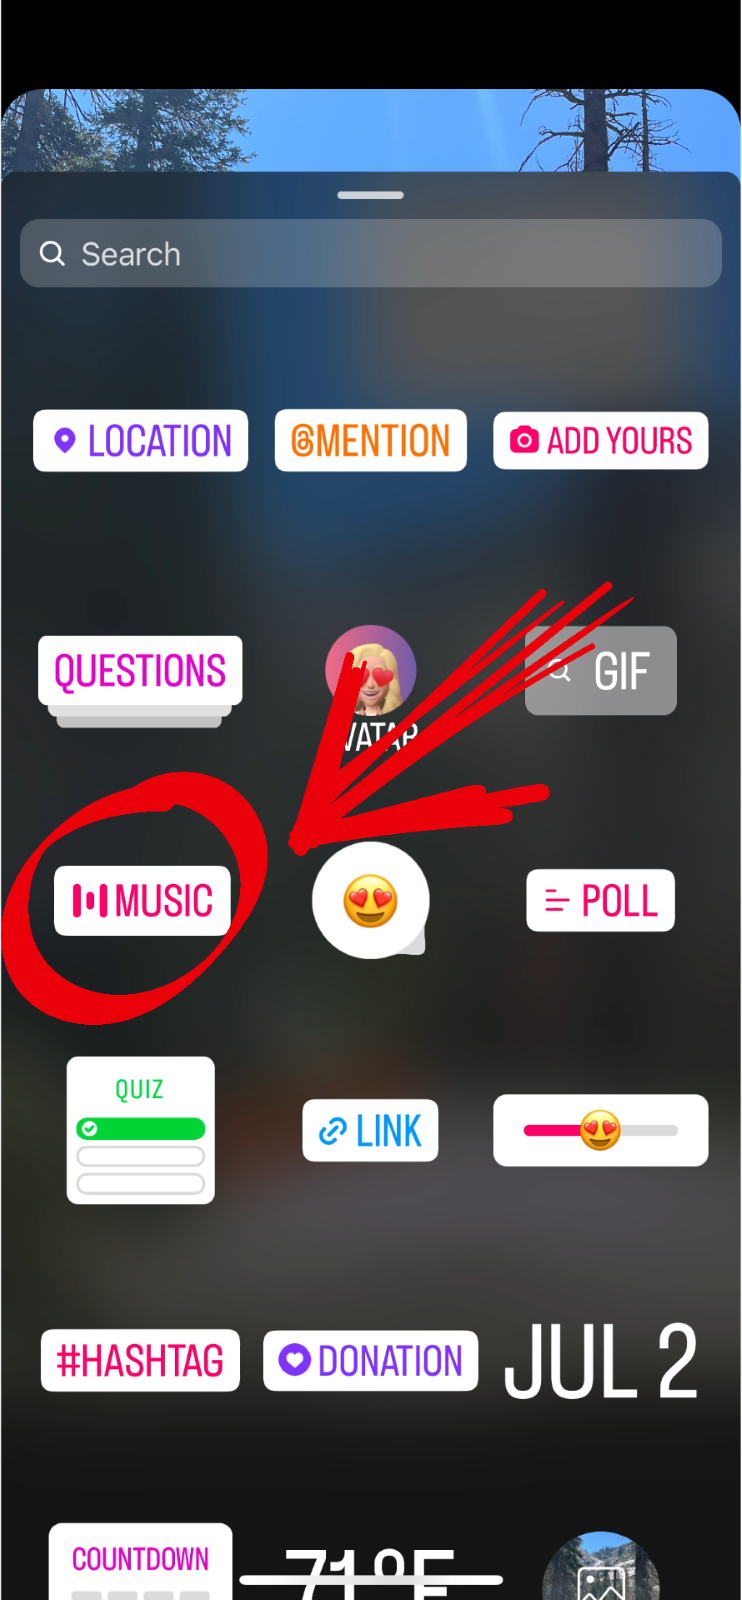 Instagram's new group chats sticker for Stories lets your